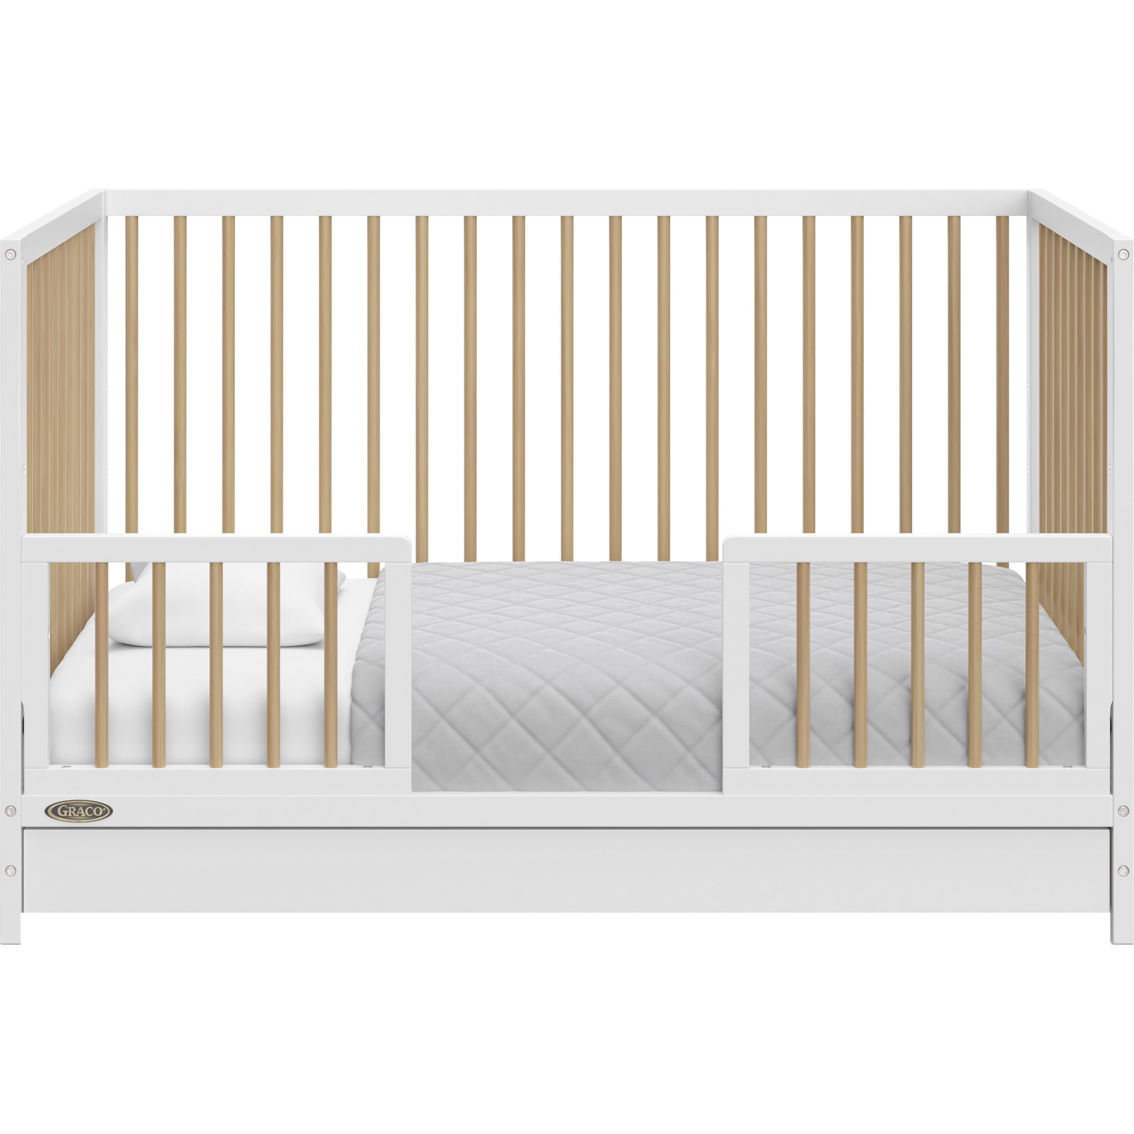 Graco Teddi 5-in-1 Convertible Crib with Drawer - Image 4 of 10